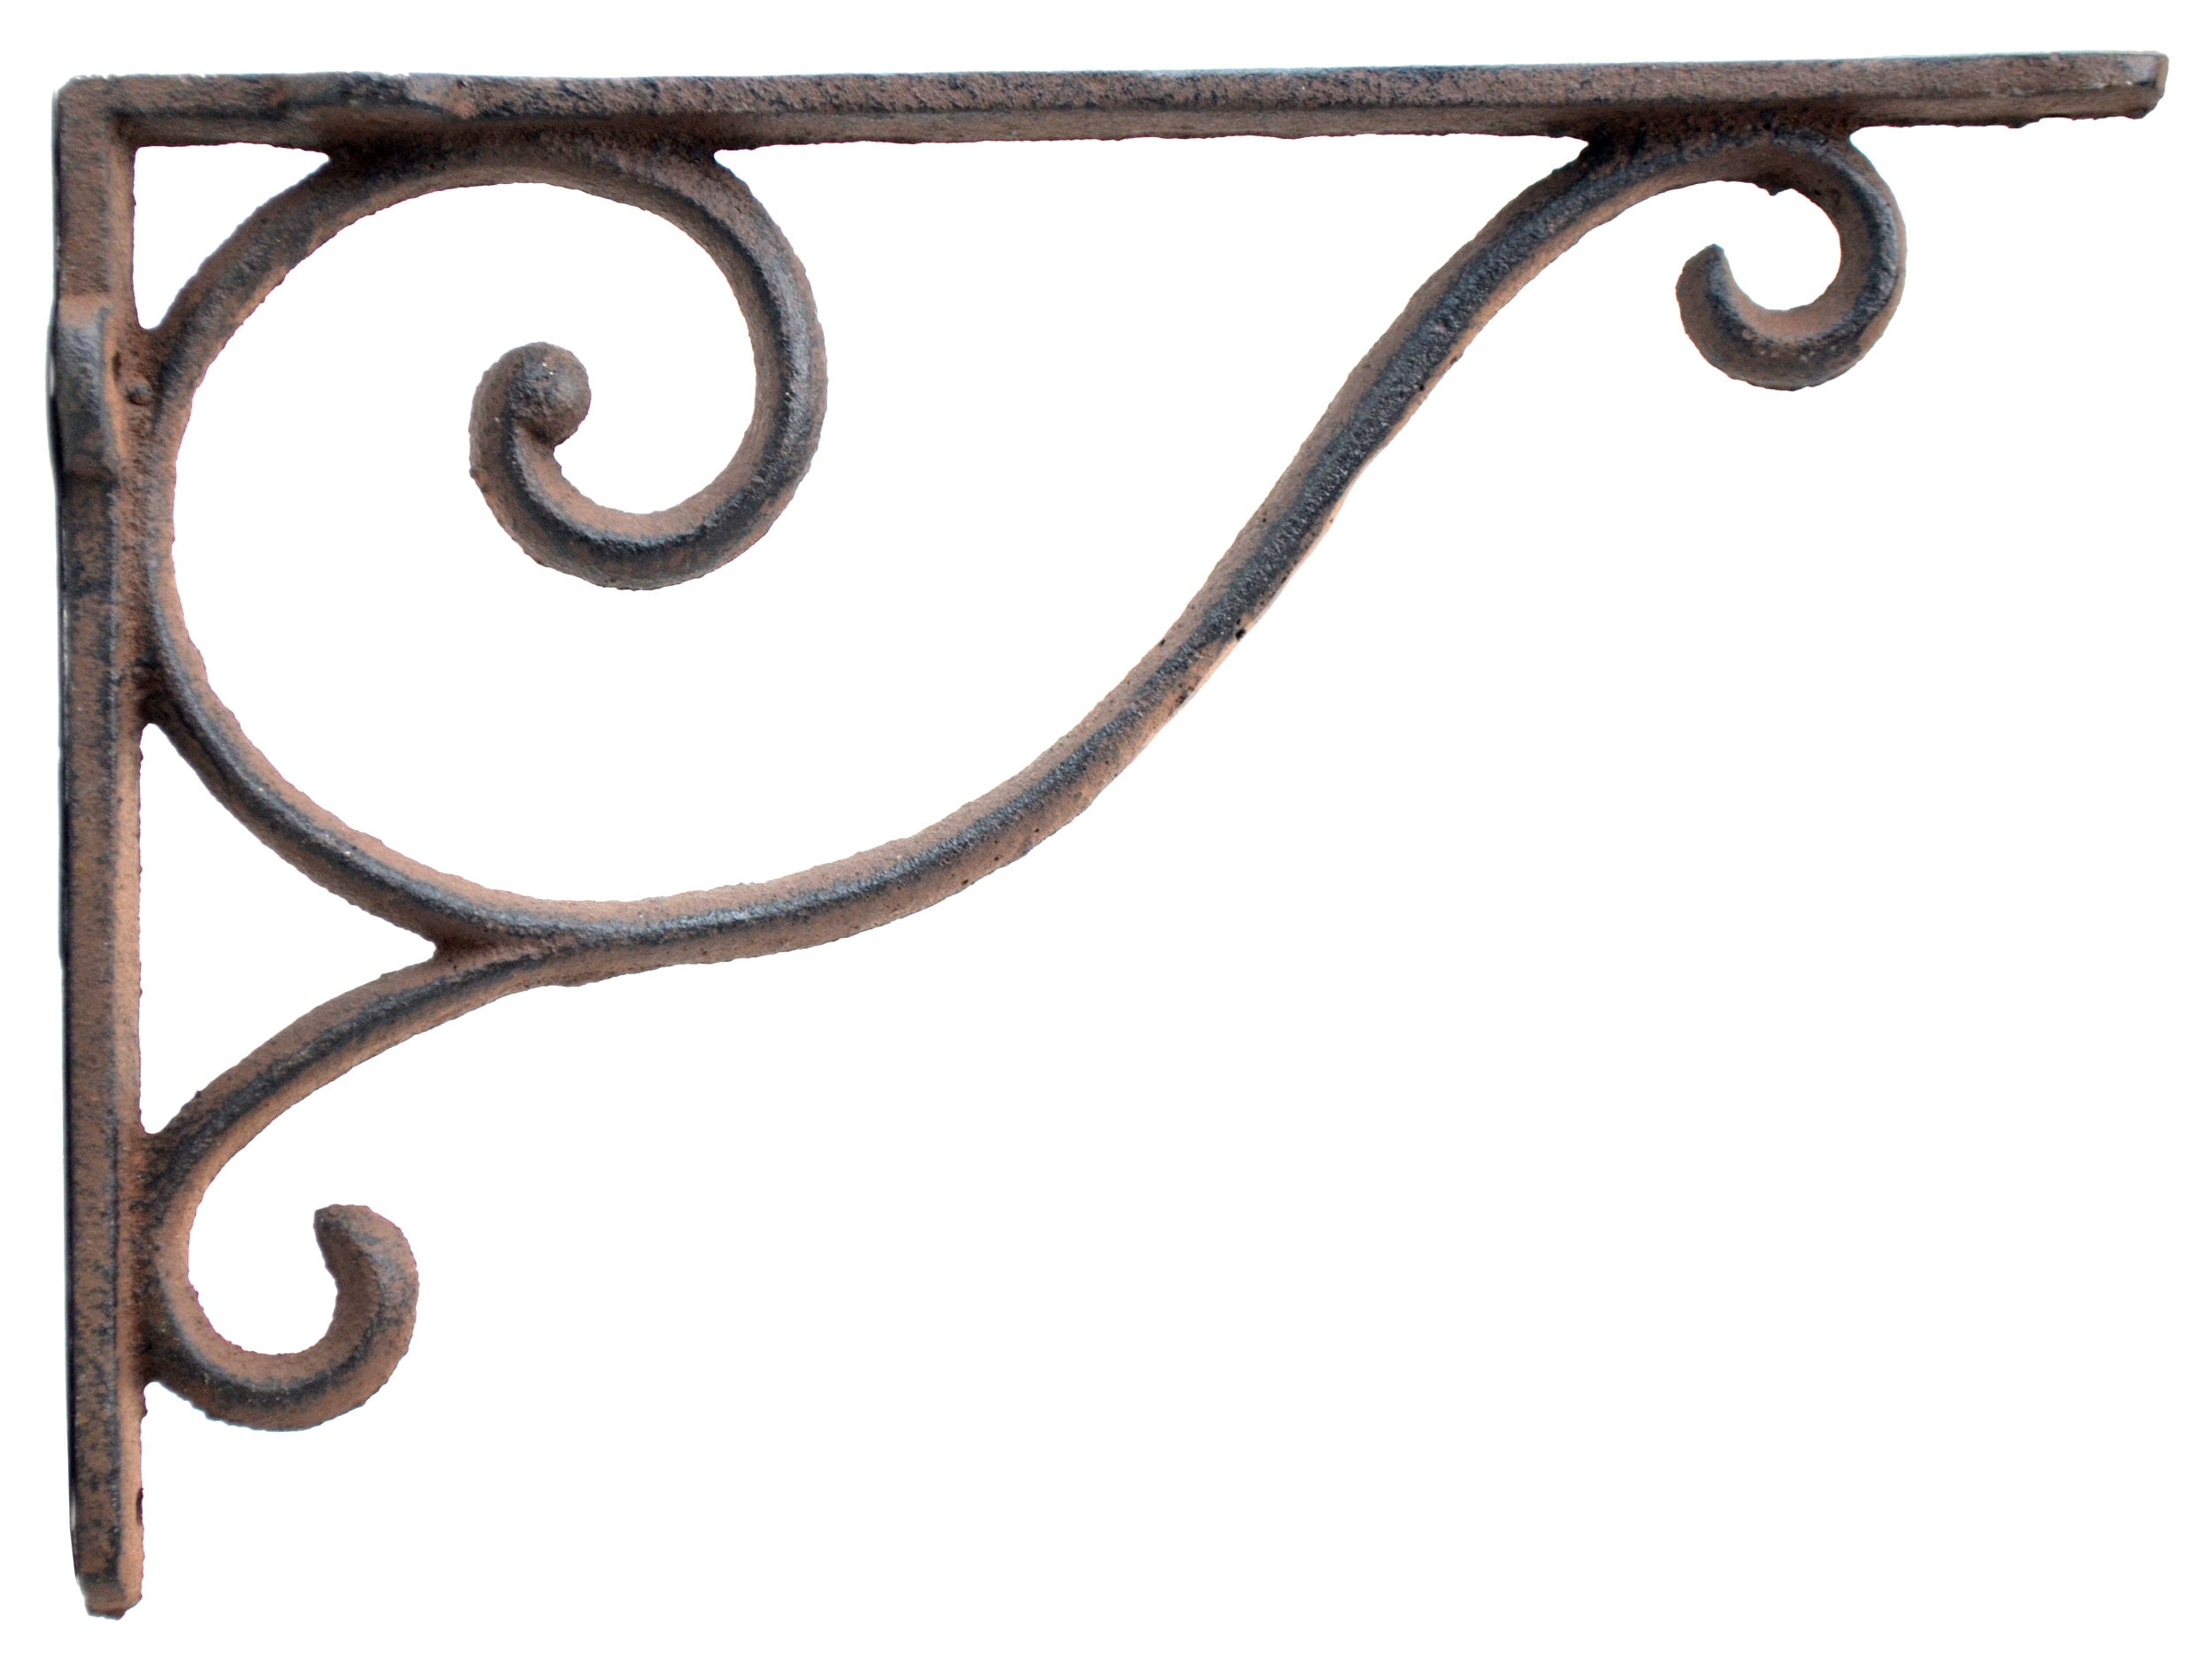 CAST IRON Rustic Brown Rooster Shelf Bracket Brace Set Of 2 Great Country Decor 